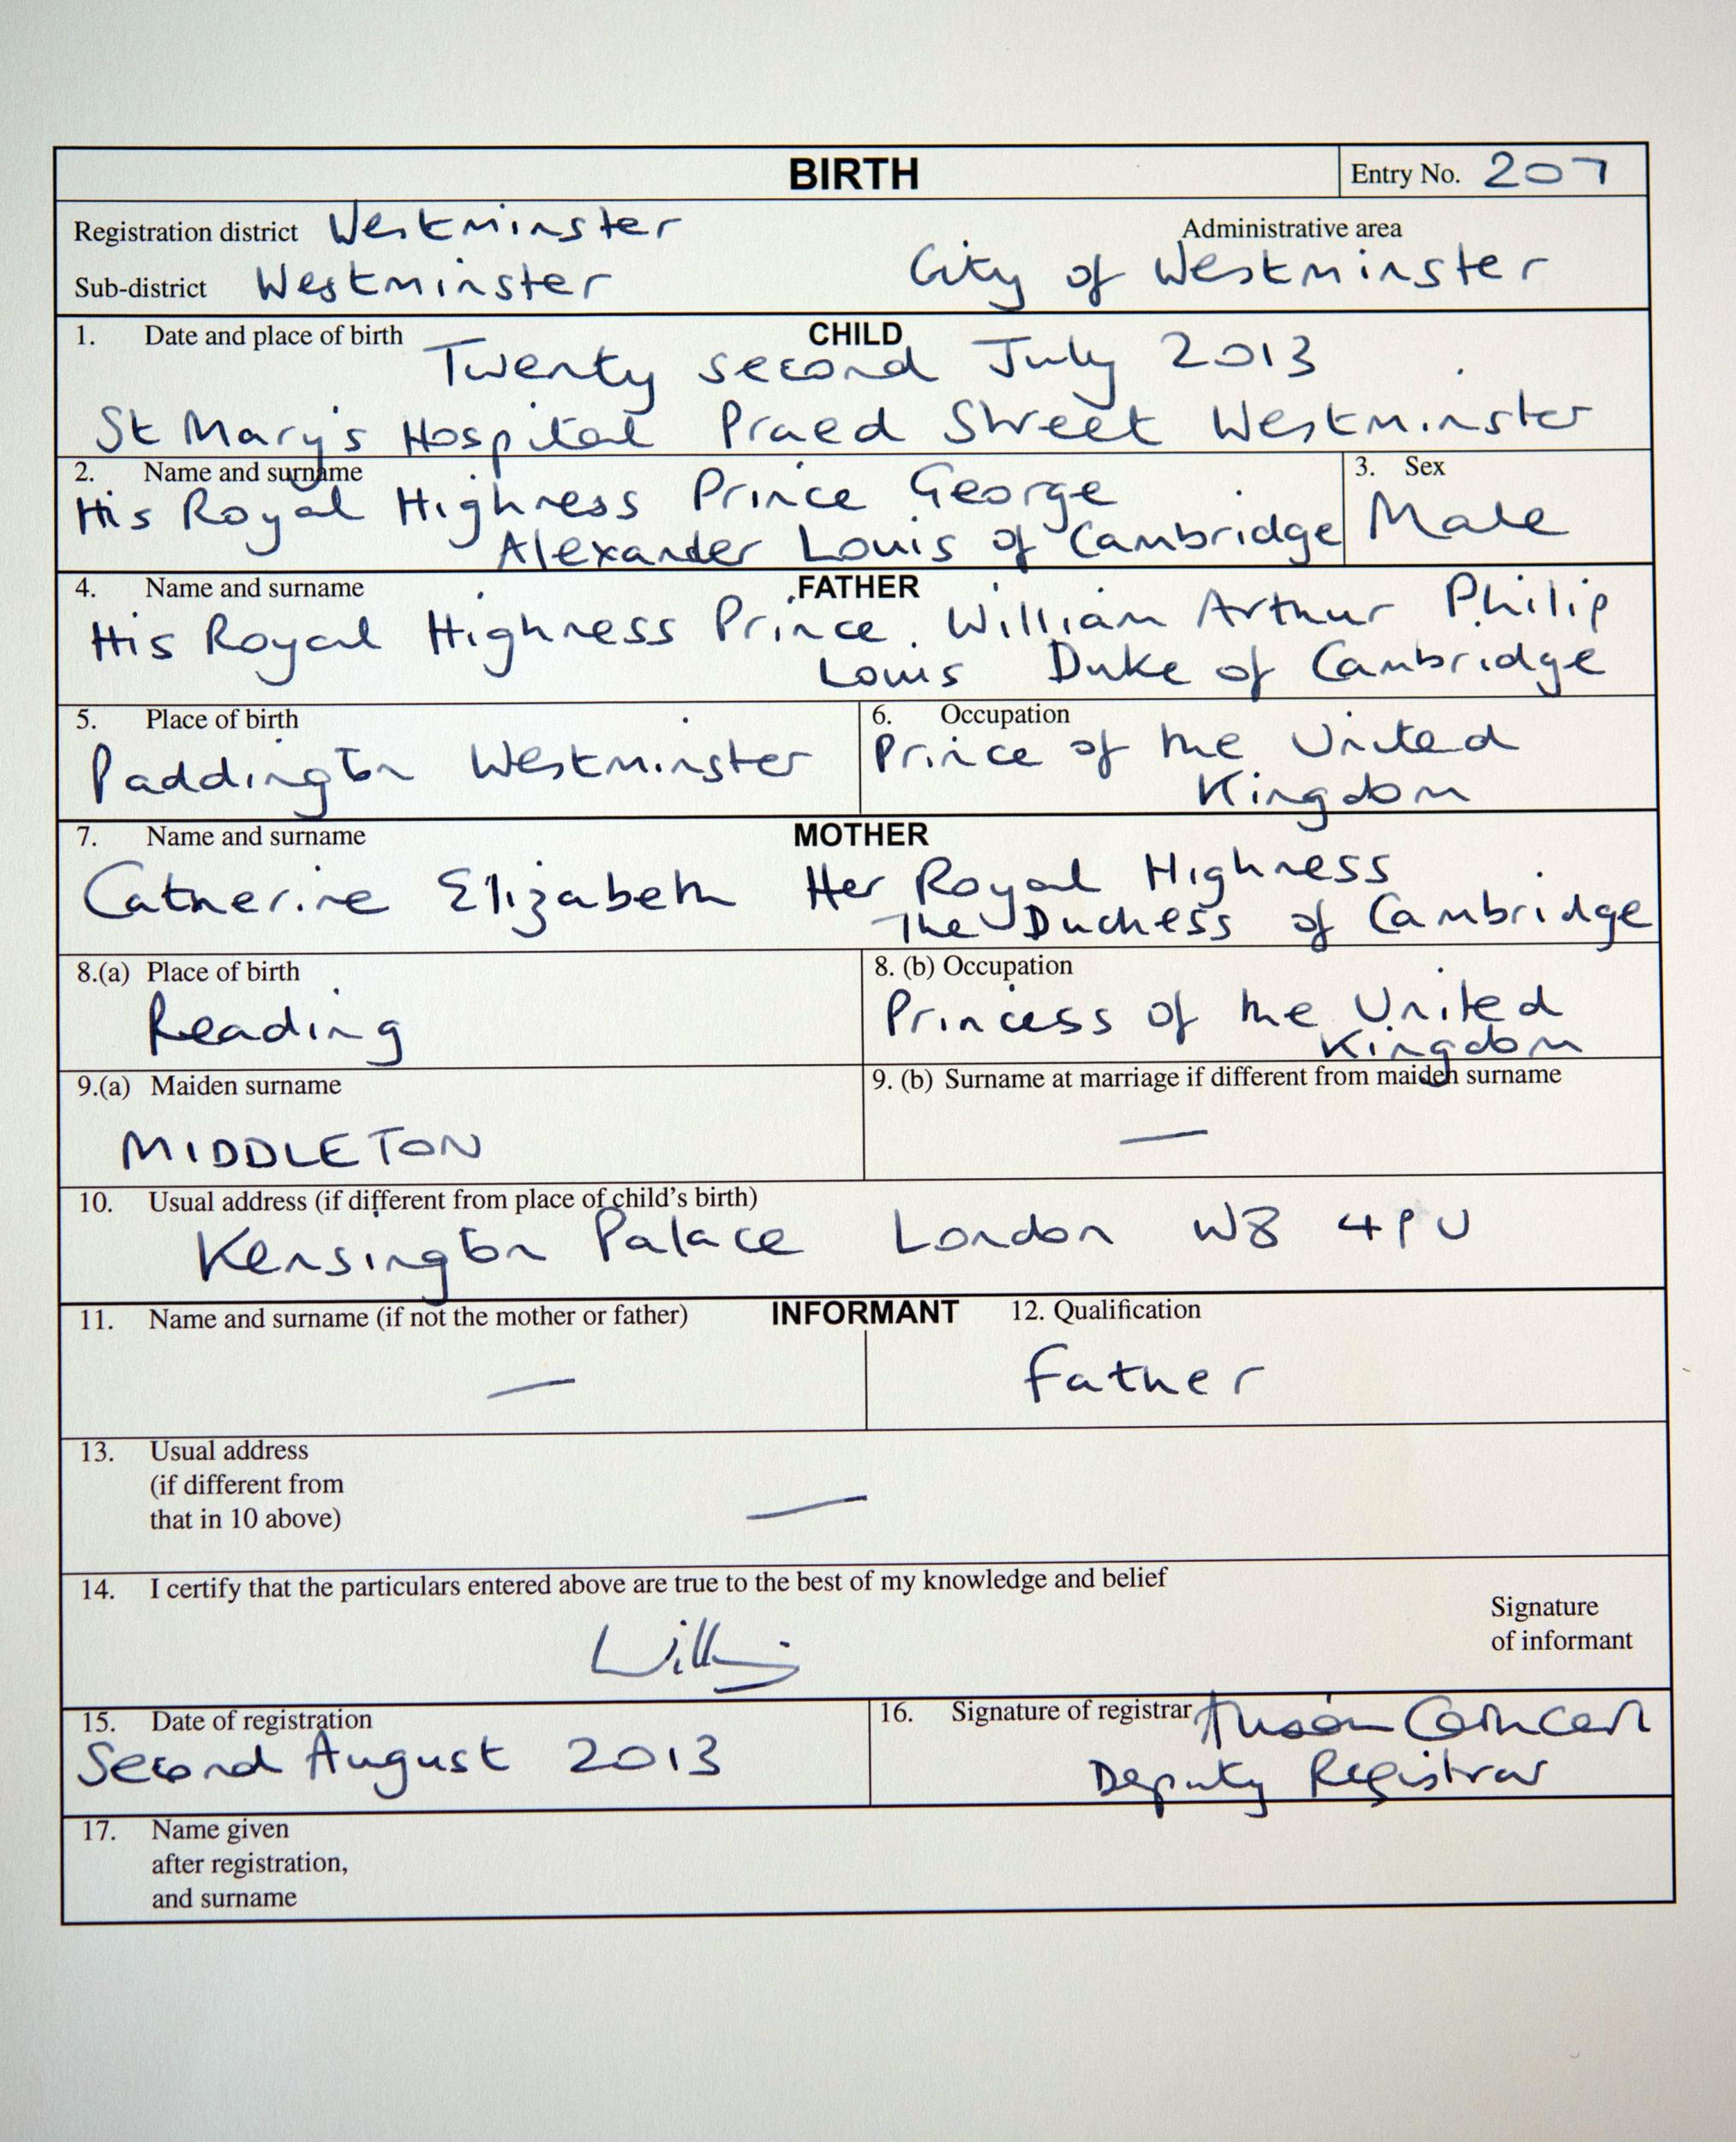 The Duke and Duchess of Cambridge Register The Birth of Their Son Prince George of Cambridge In London